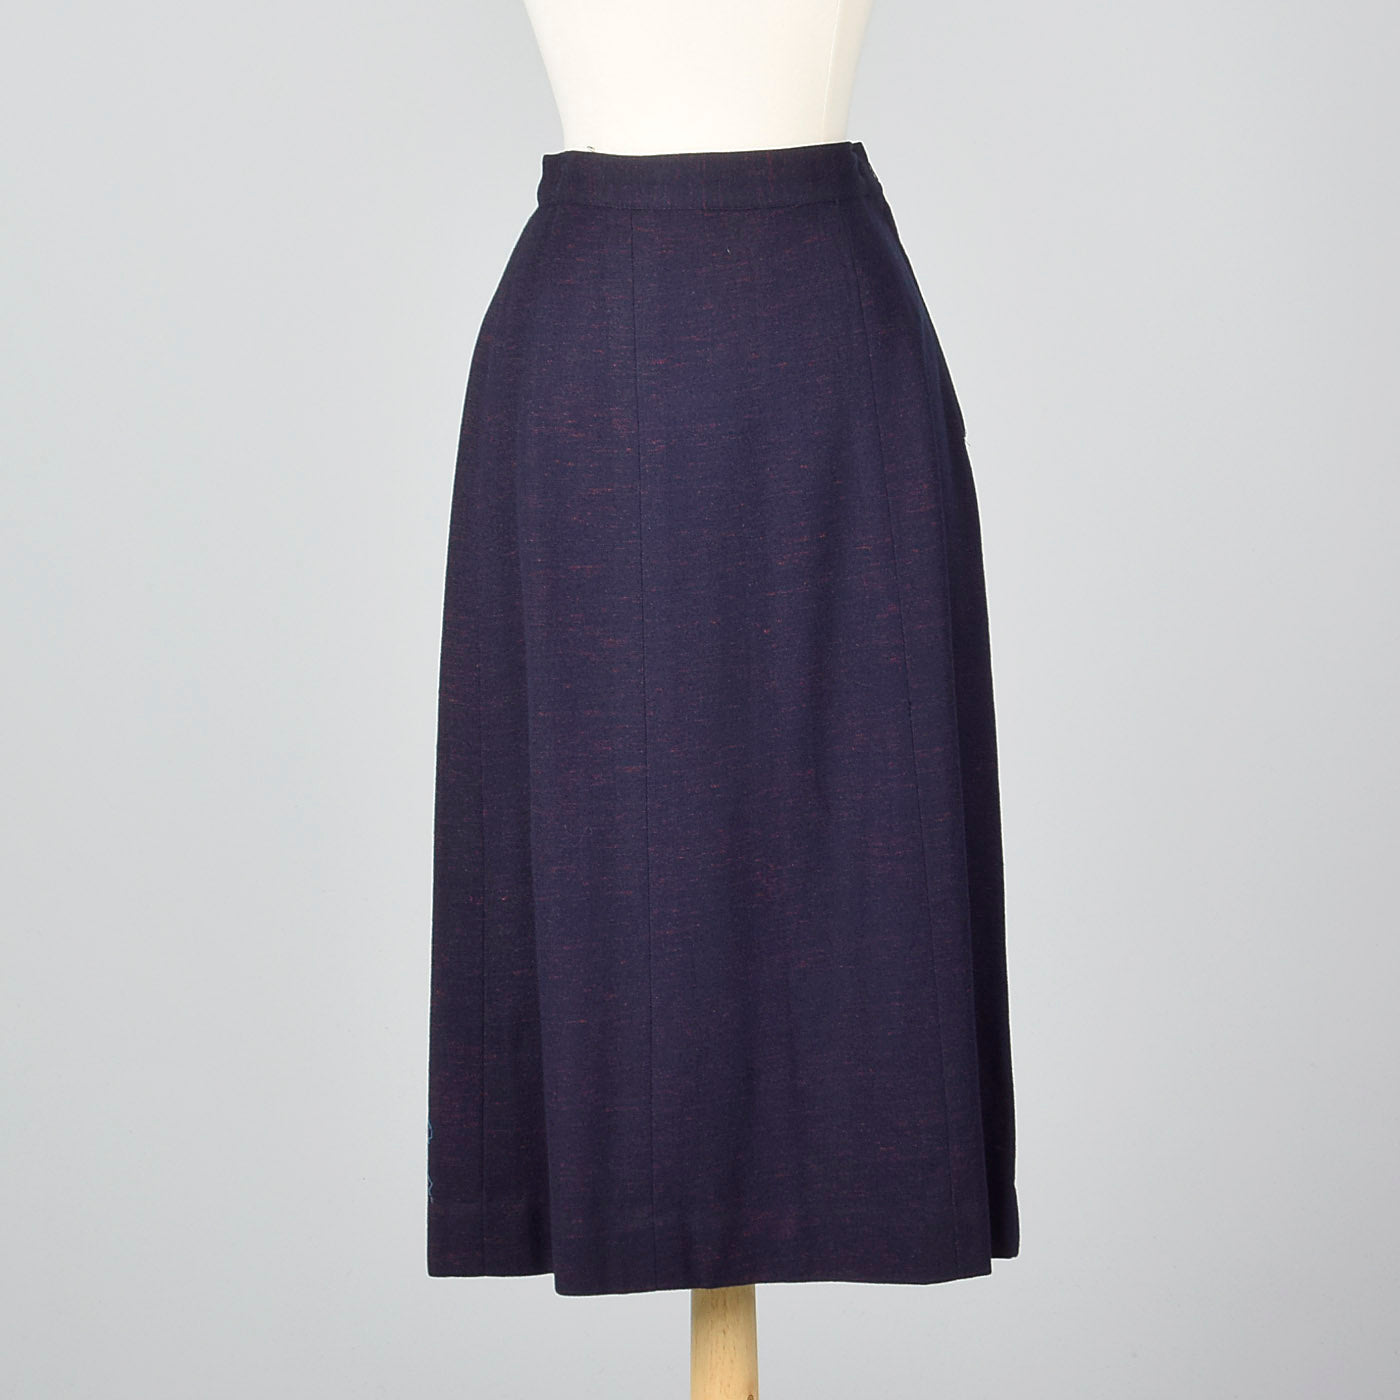 1950s Navy Blue Skirt Suit with Decorative Buttons